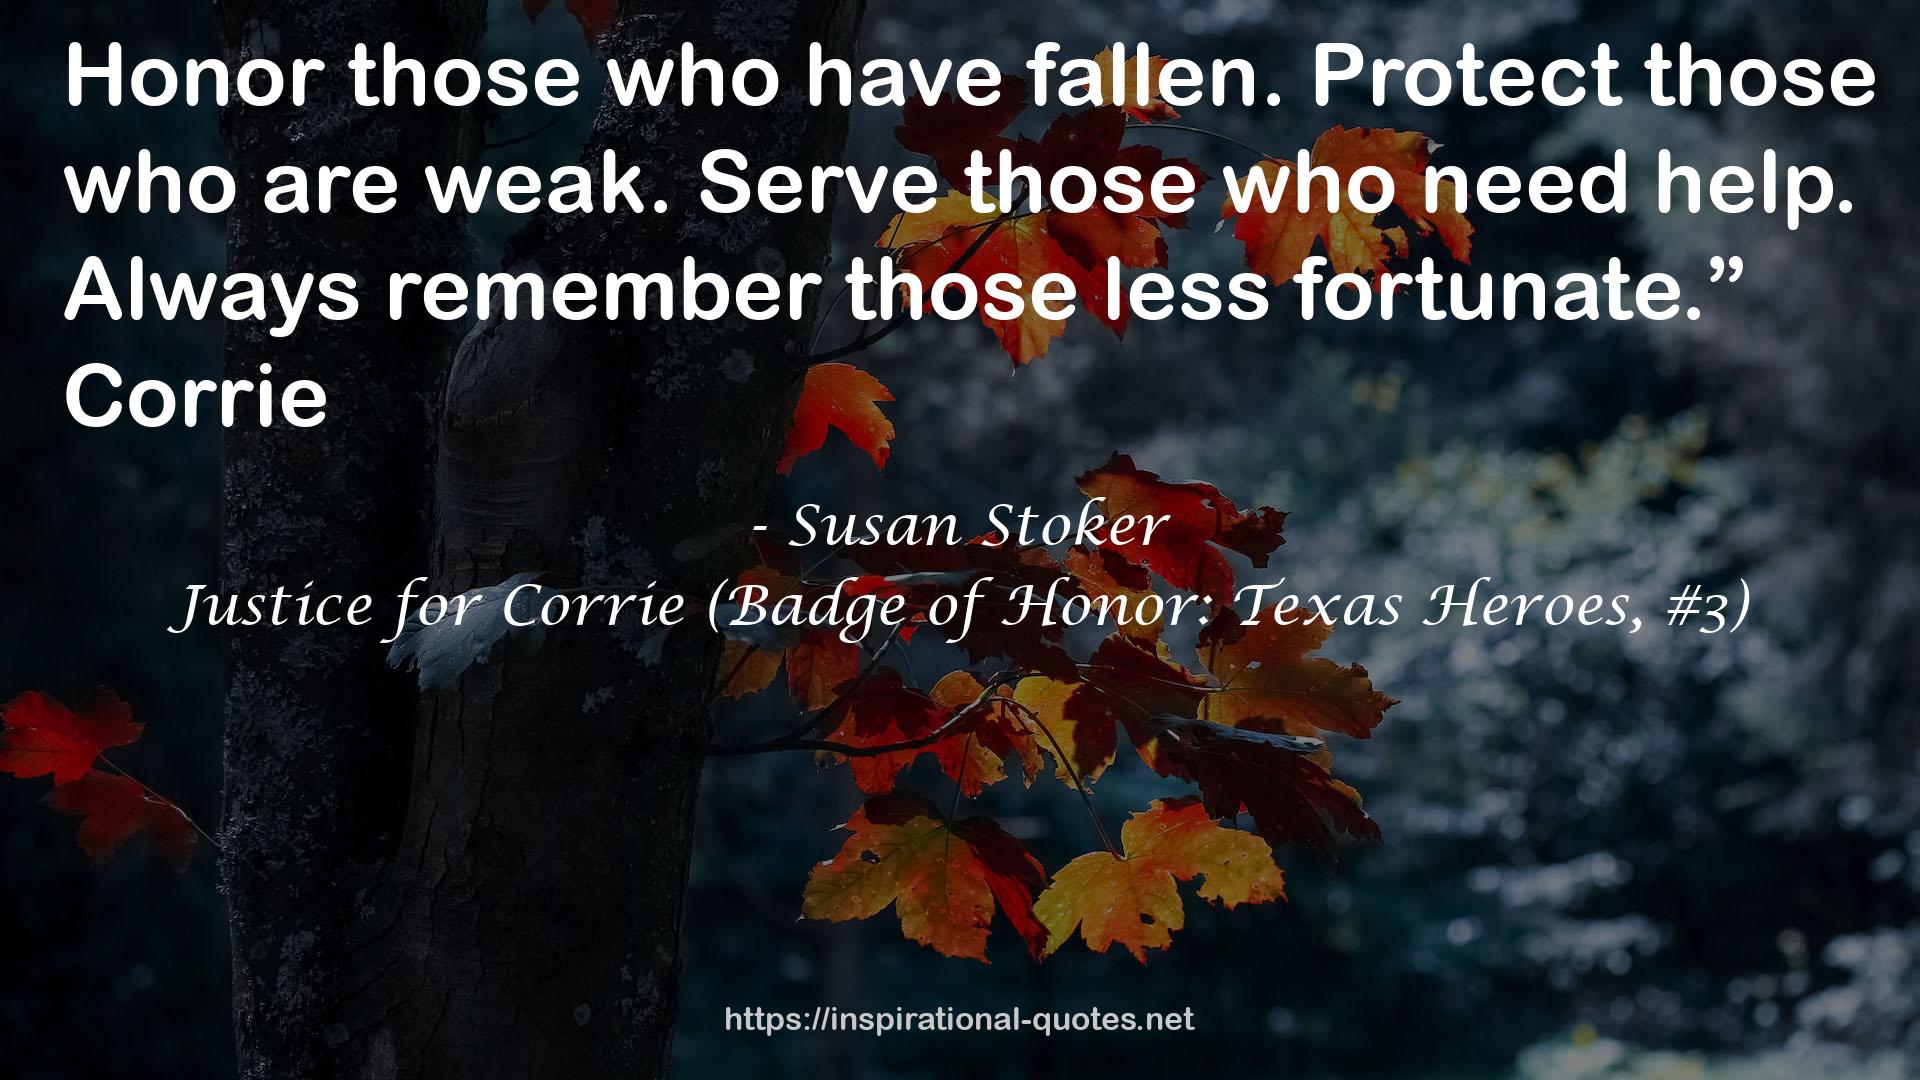 Justice for Corrie (Badge of Honor: Texas Heroes, #3) QUOTES